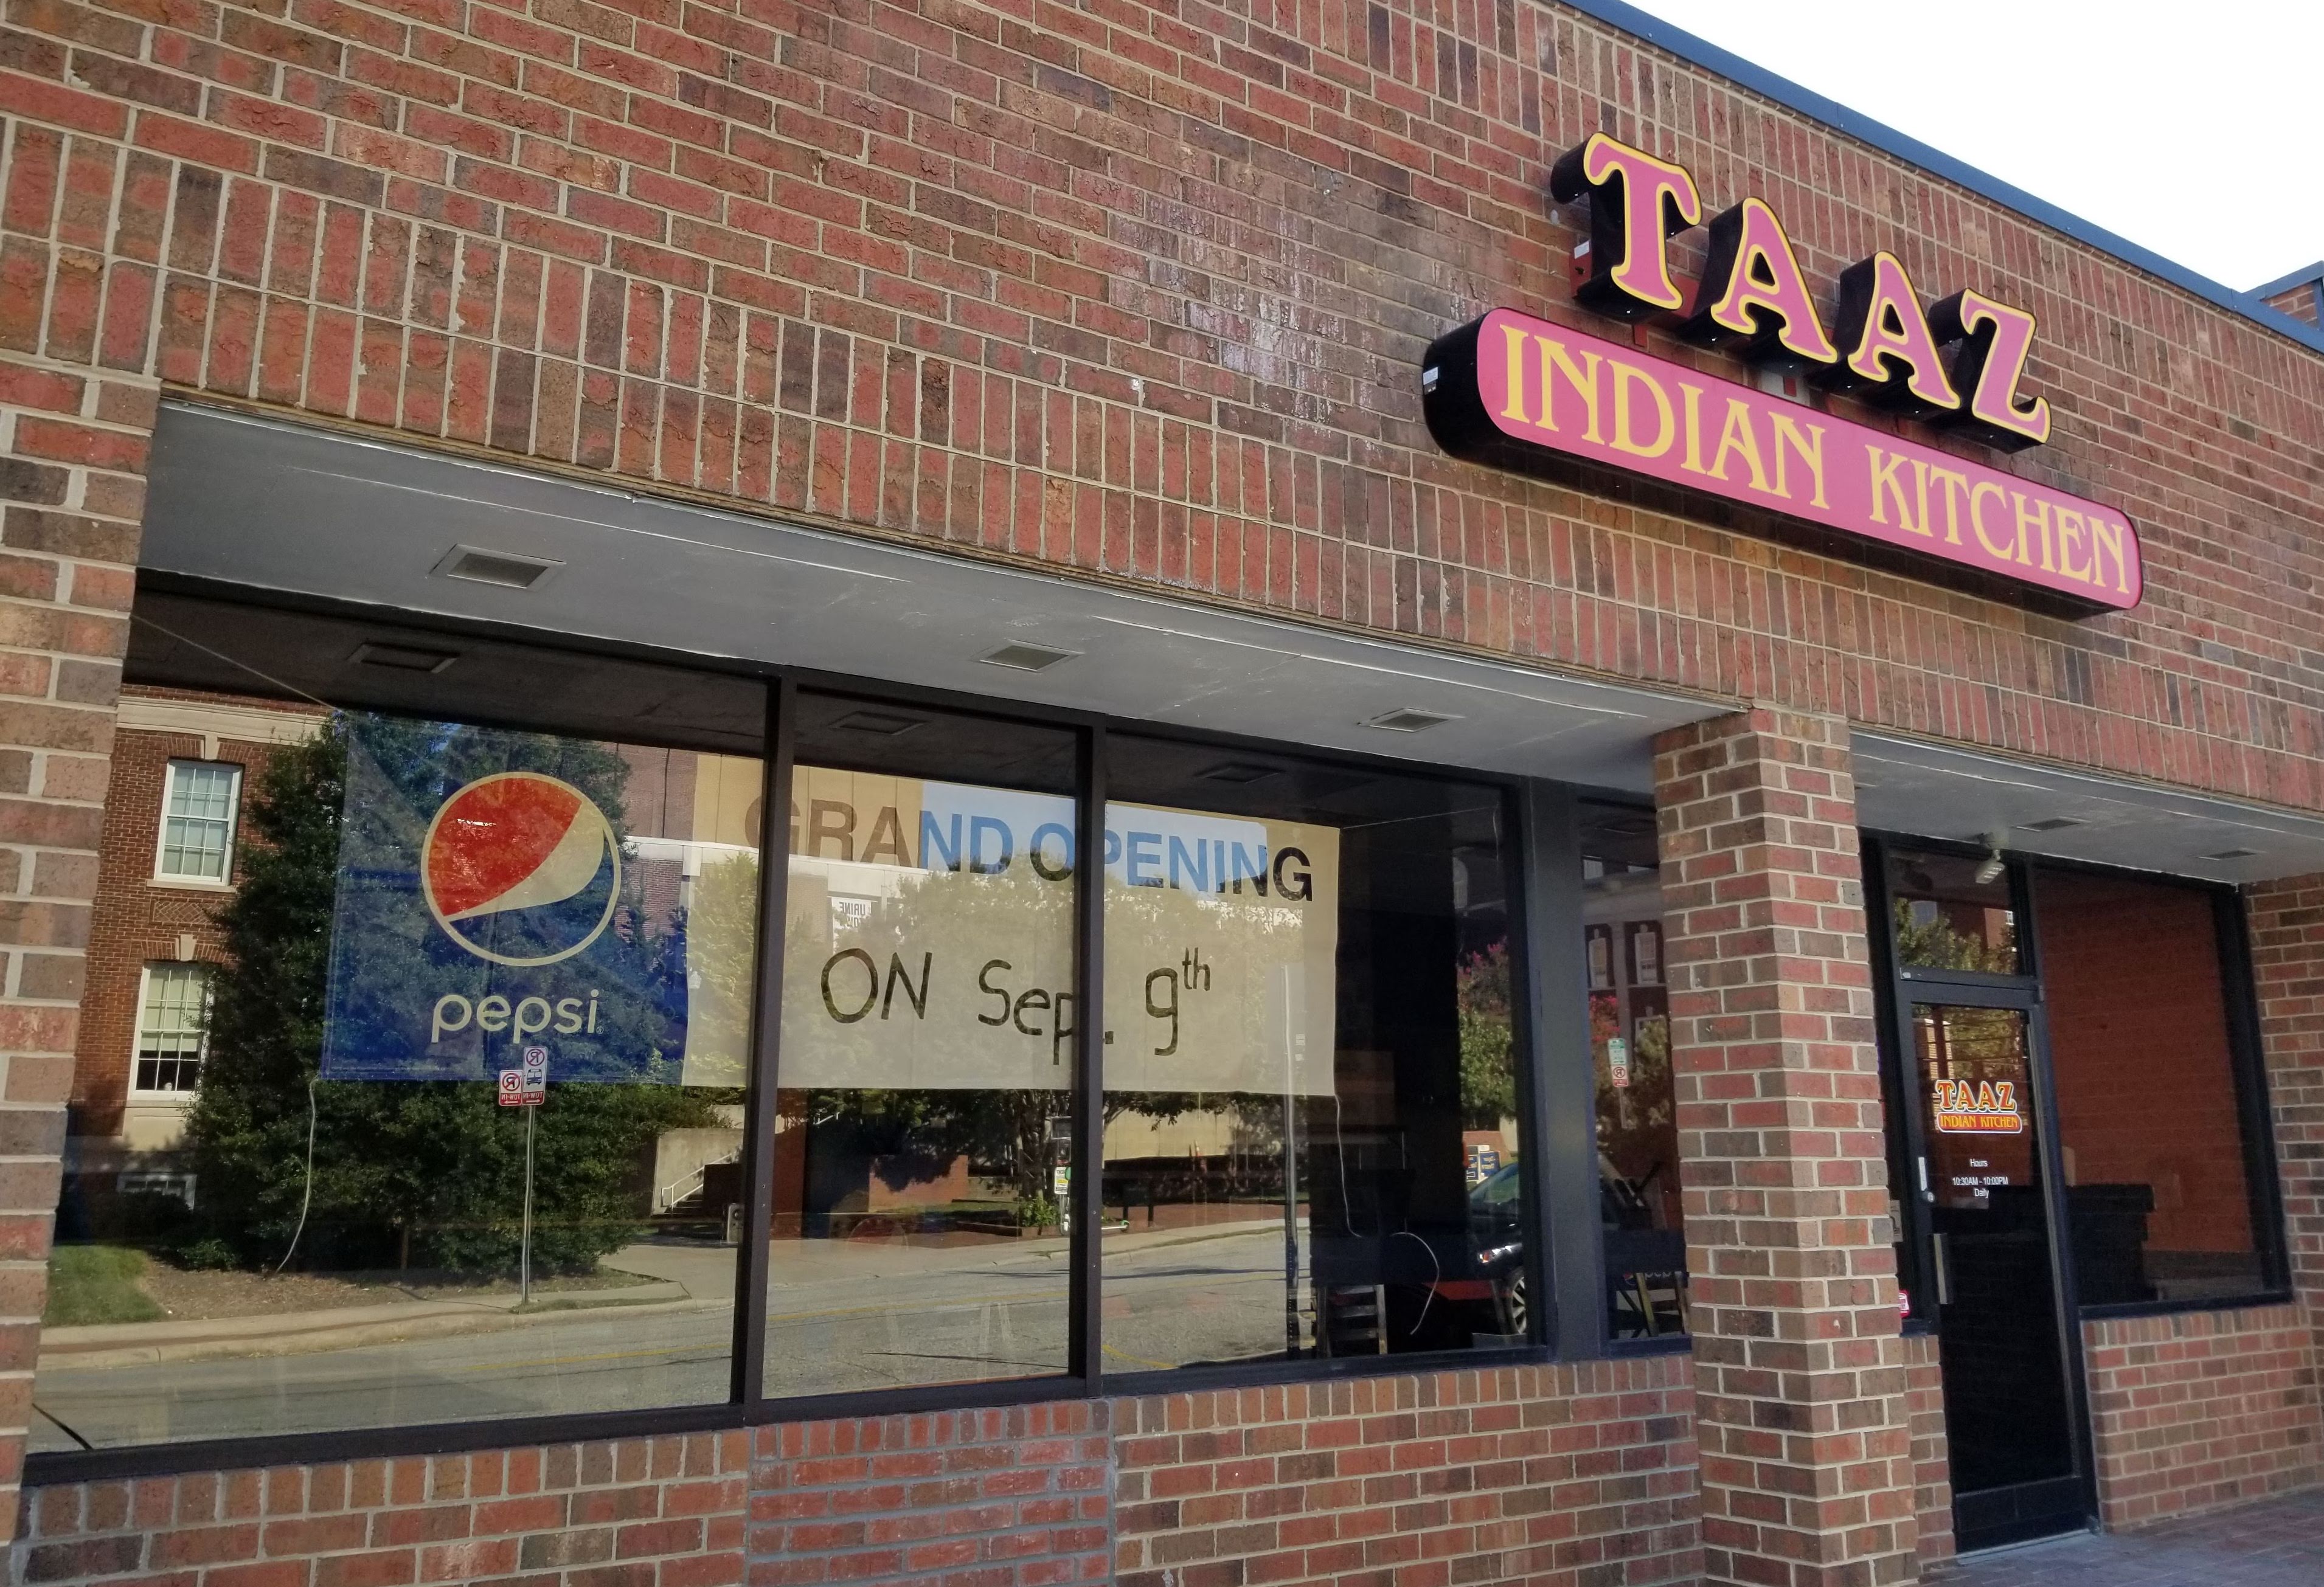 view from sidewalk of taaz indian kitchen